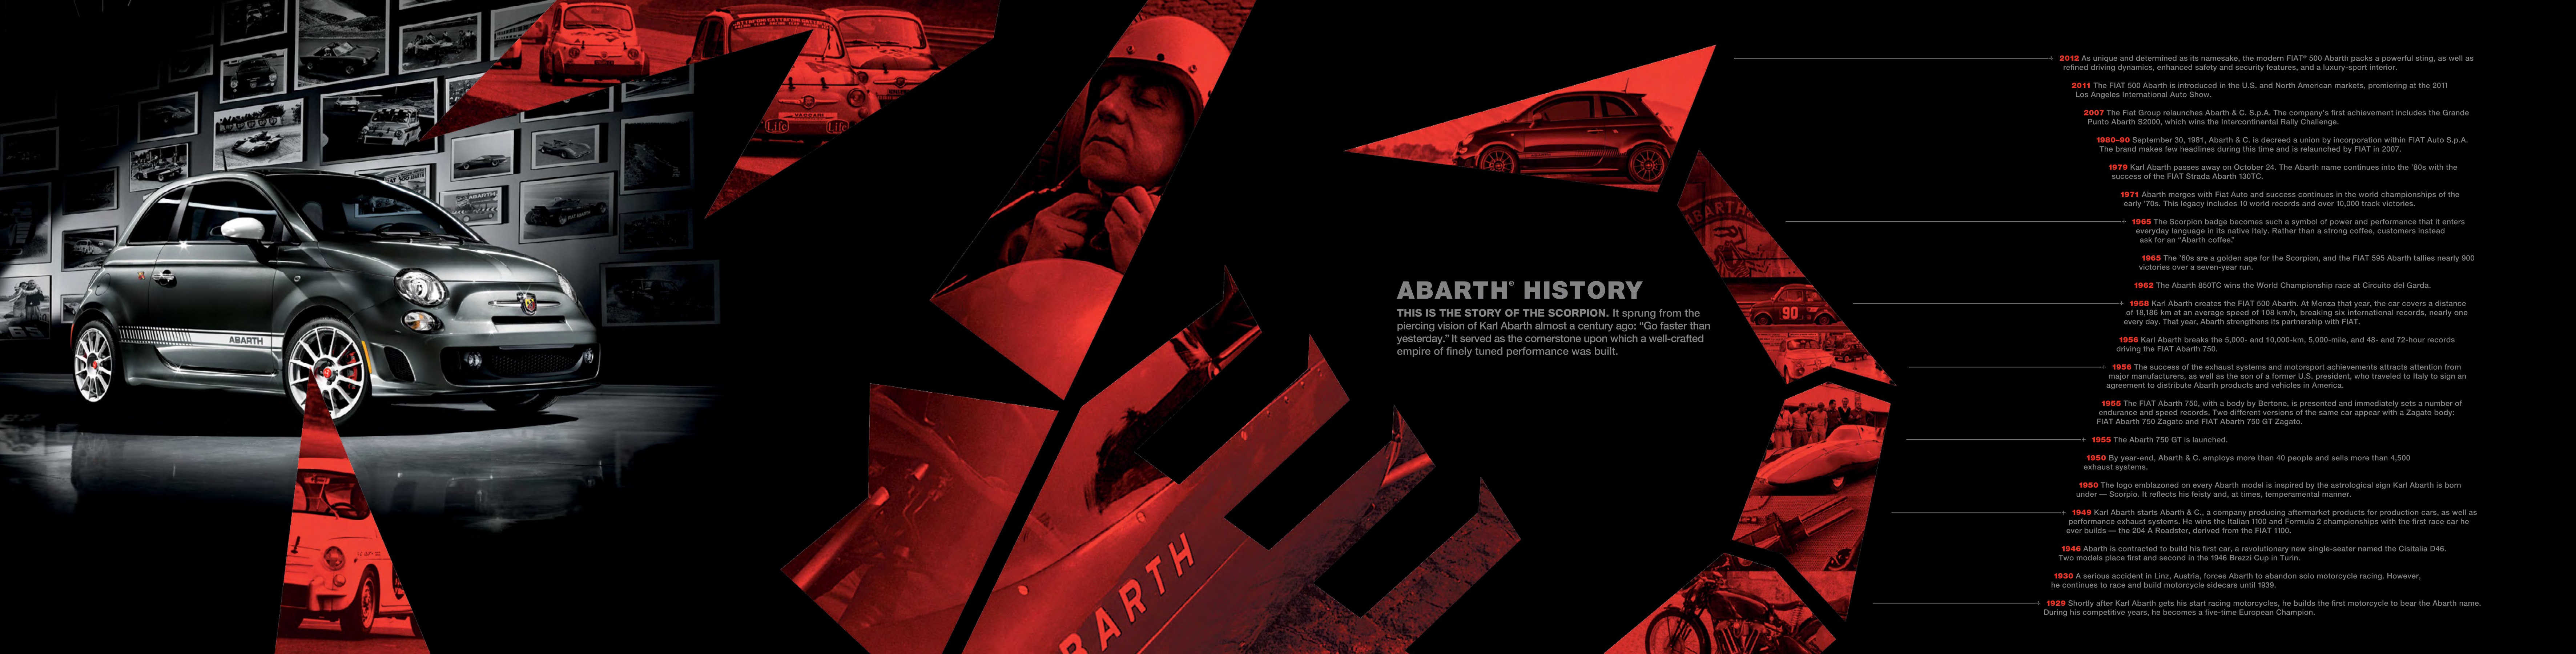 2014 Fiat 500 Abarth Brochure Page 7